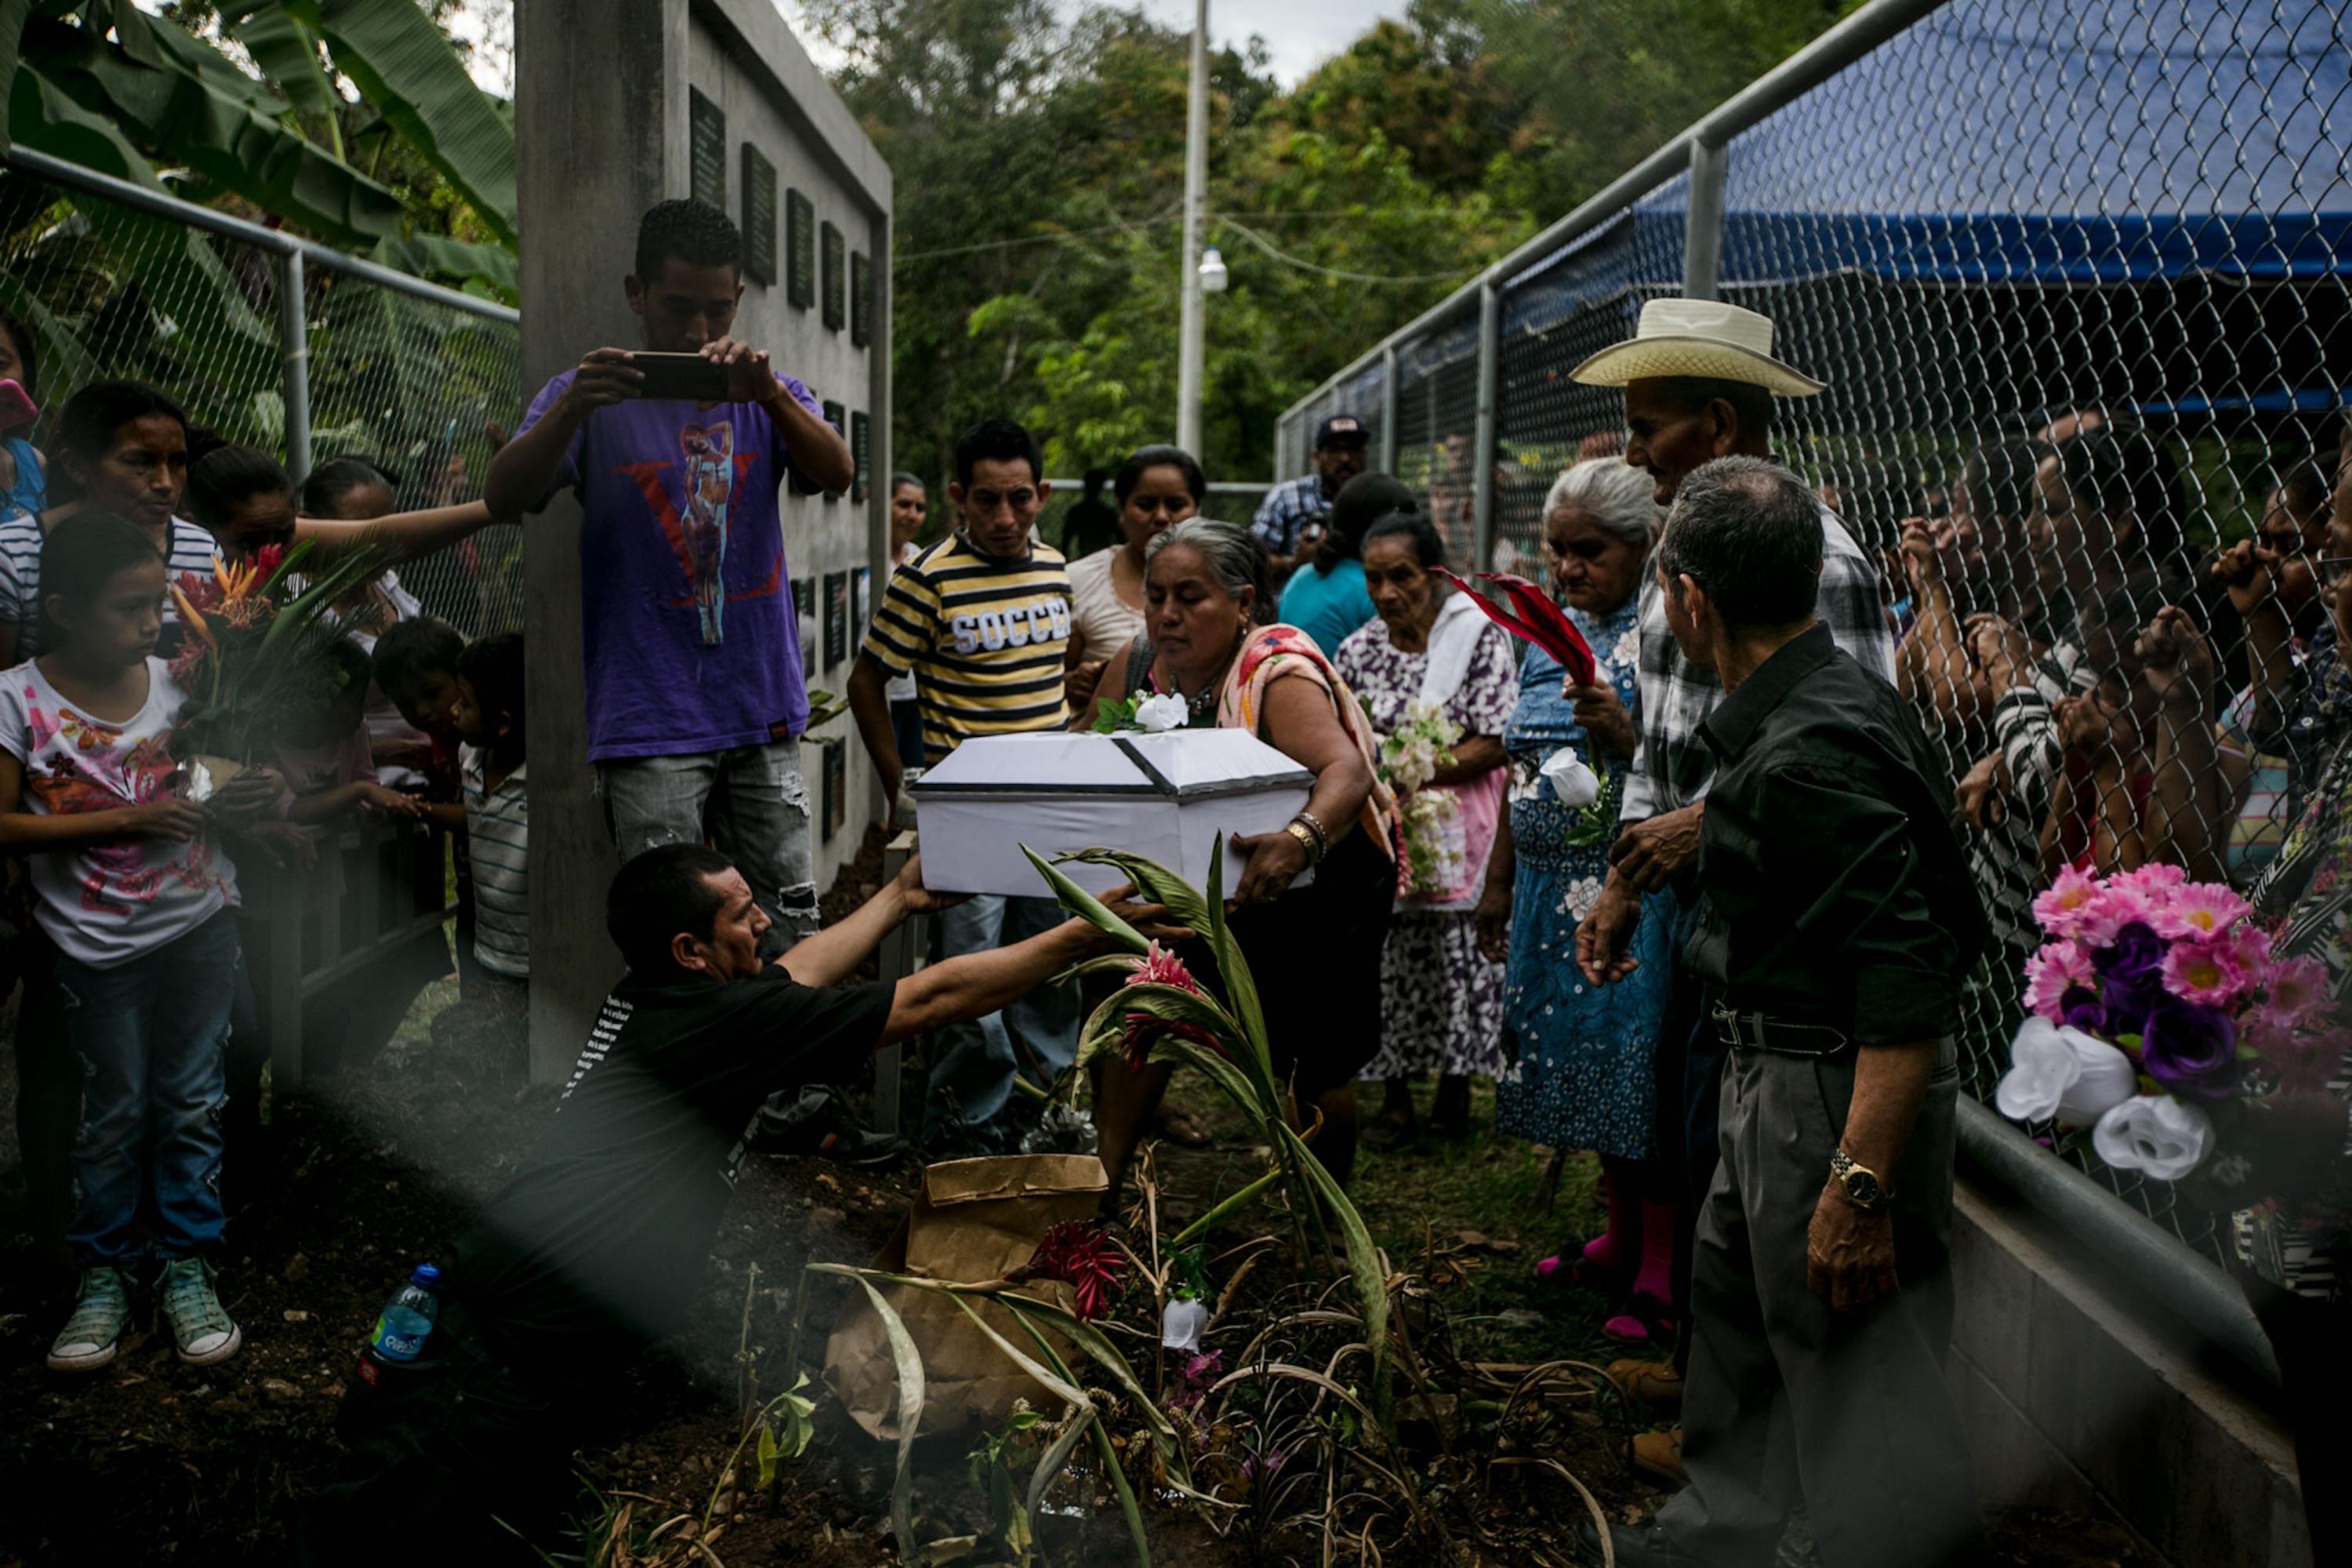 Residents of the hamlet of El Potrero in the village of La Joya bury their family members in a monument honoring the victims of the El Mozote massacre. They buried the remains of 19 people on Sunday, Dec. 11, 2016. Photo Fred Ramos